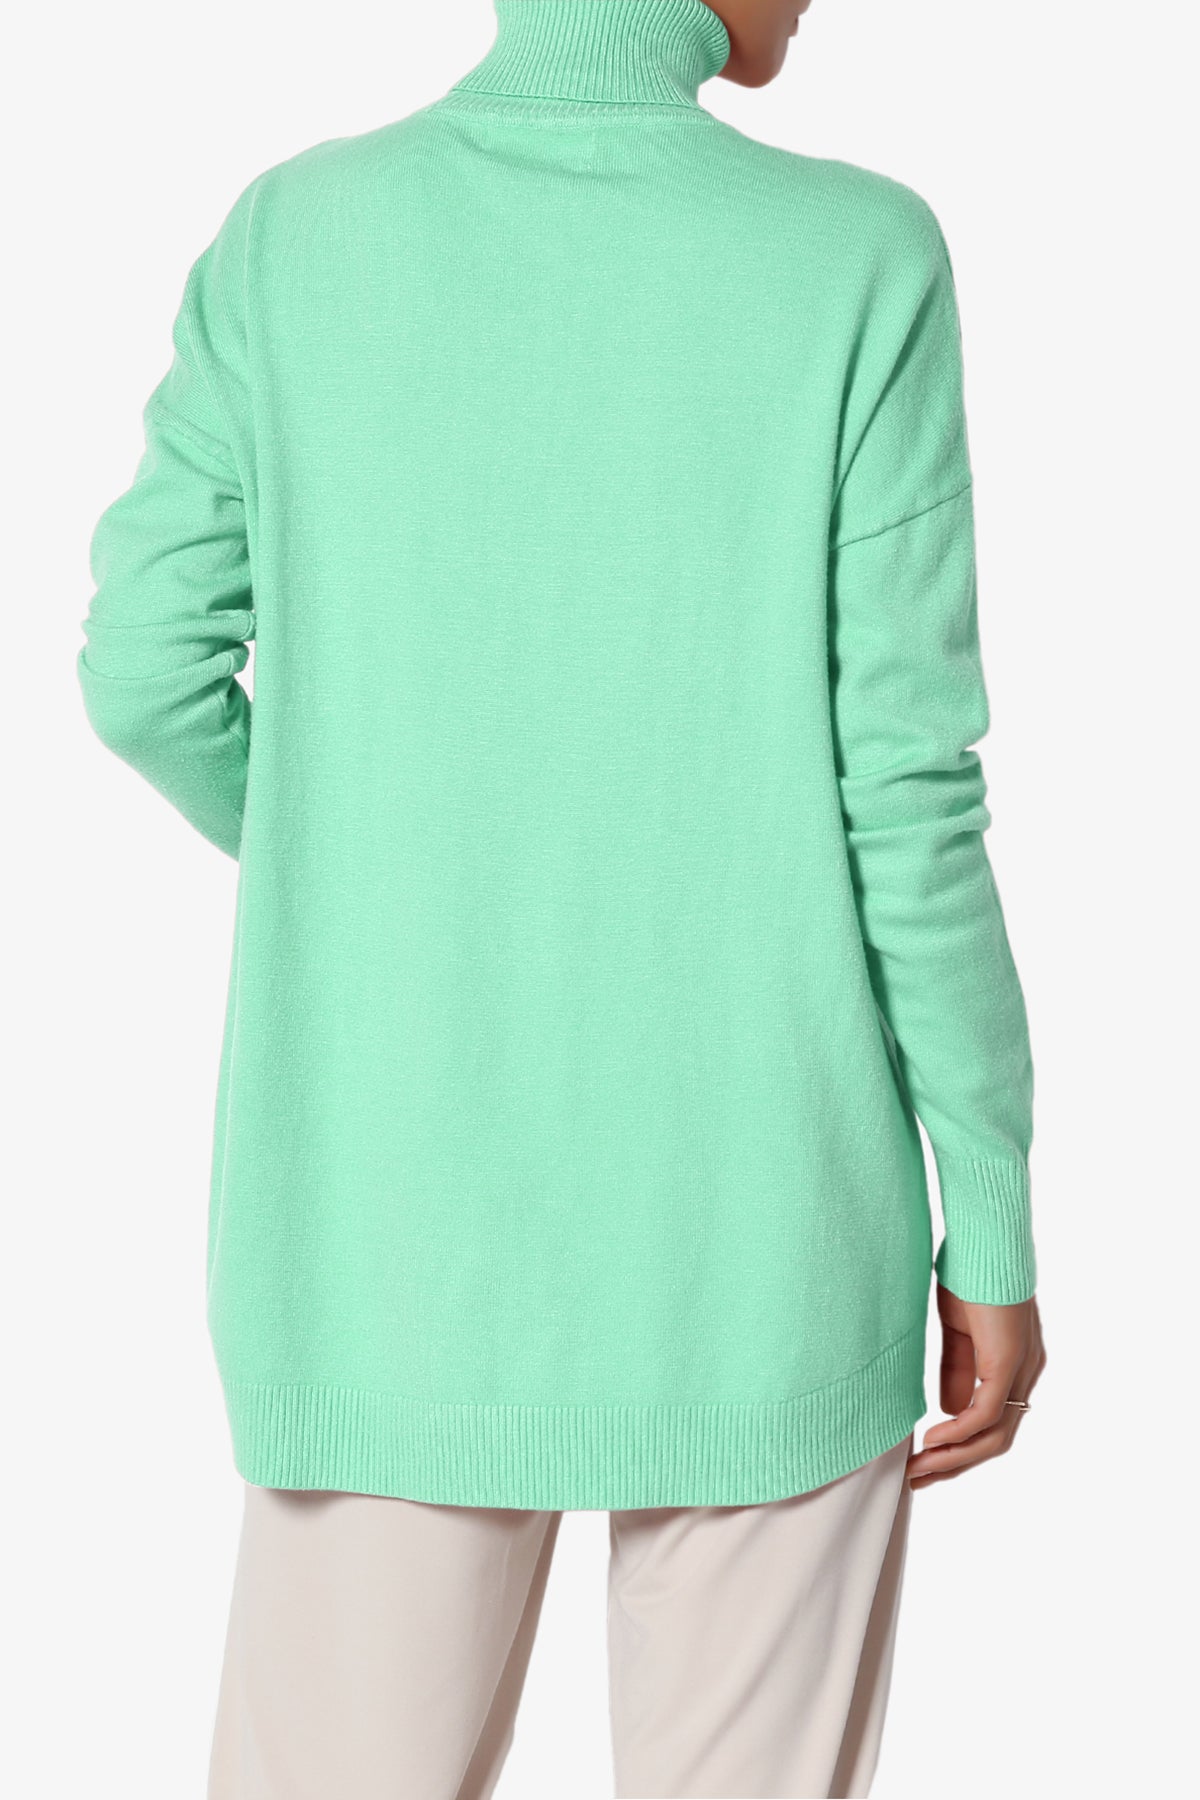 Henley Turtle Neck Knit Sweater MORE COLORS